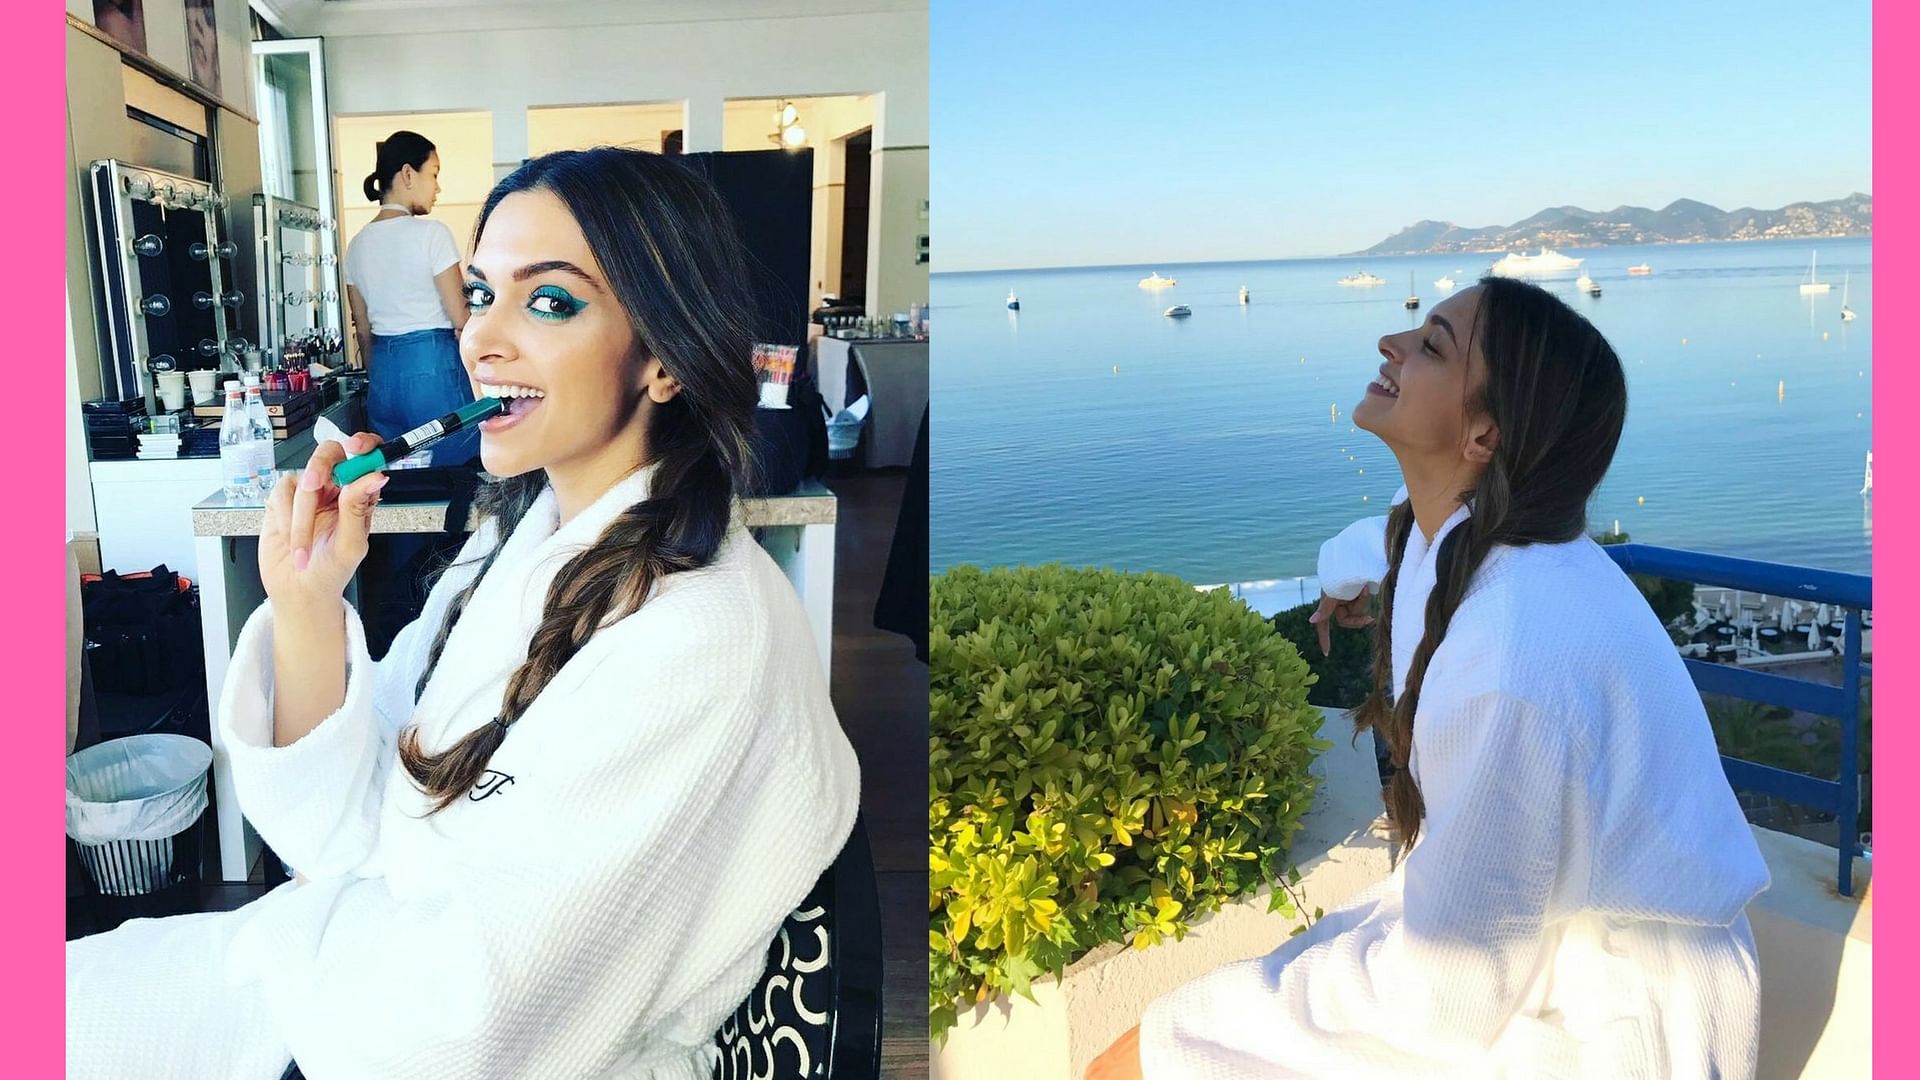 Deepika Padukone is getting ready to hit the red carpet at Cannes. (Photo courtesy: Twitter)